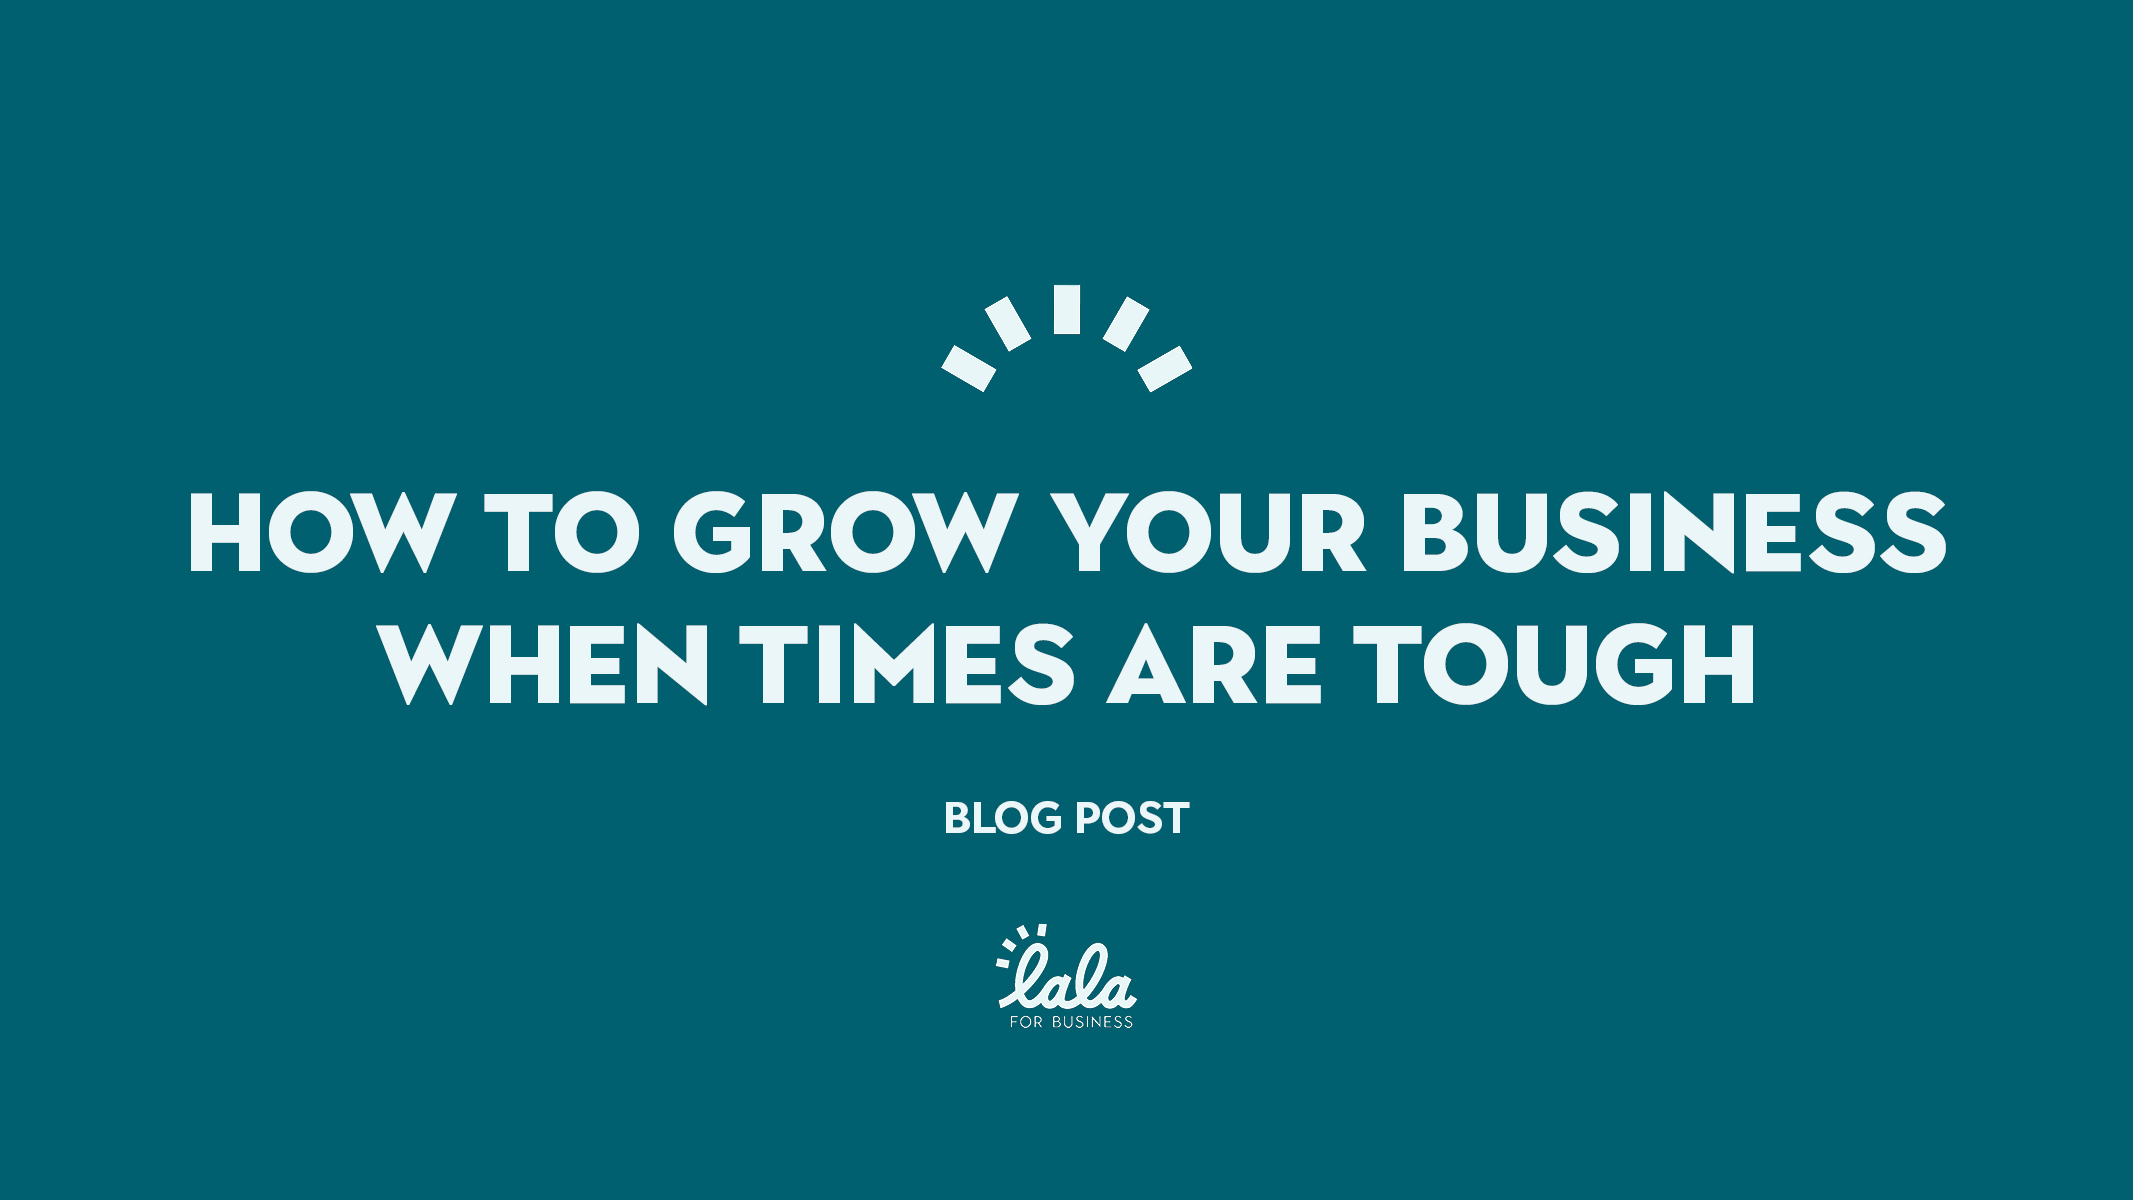 How to grow your business when times are tough